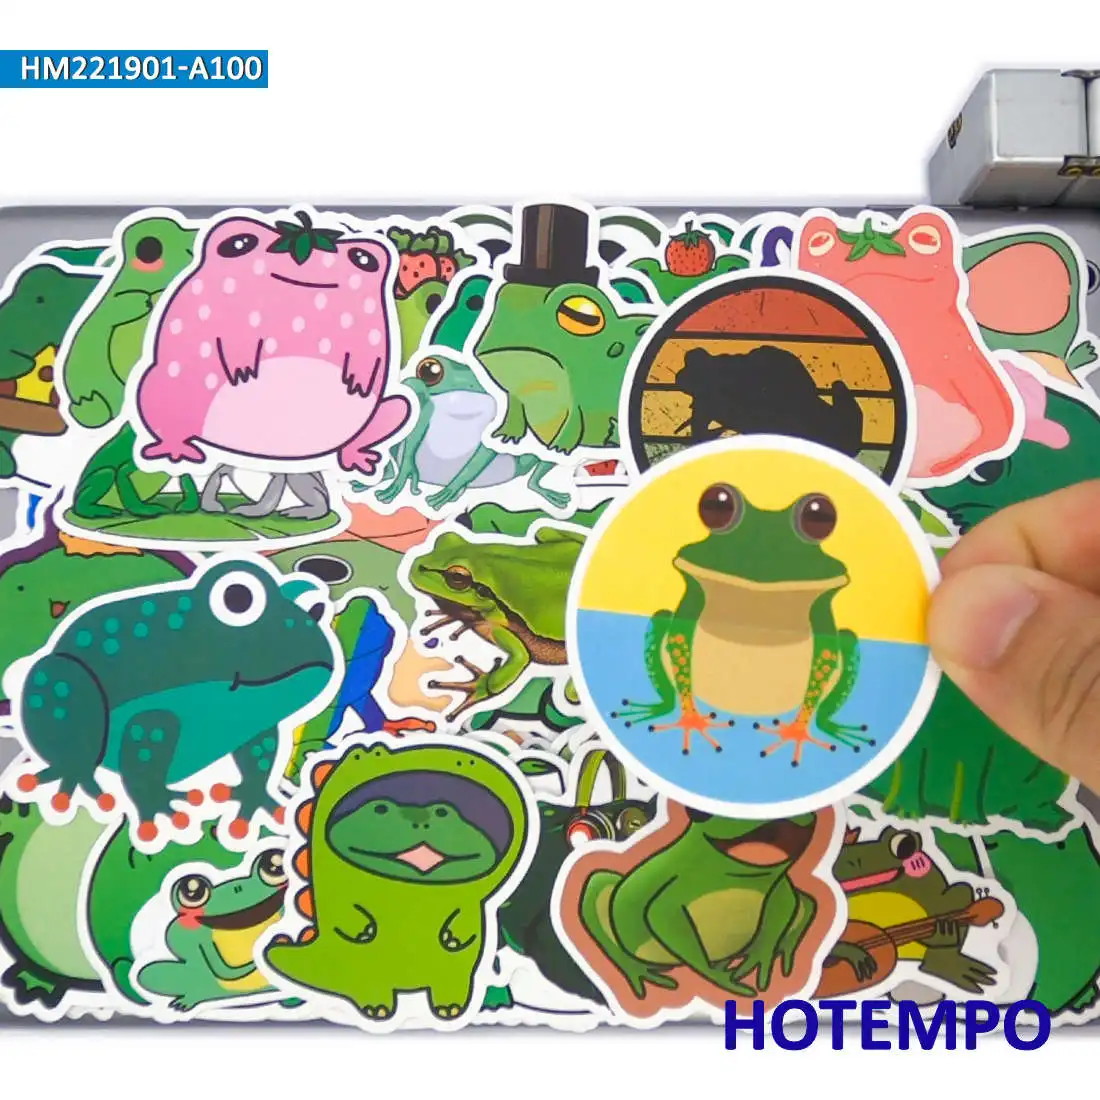 50/100 Pieces Cute Green Frog Cartoon Graffiti Funny Animal Phone Laptop Car Stickers for Notebooks Guitar Suitcase Bike Sticker